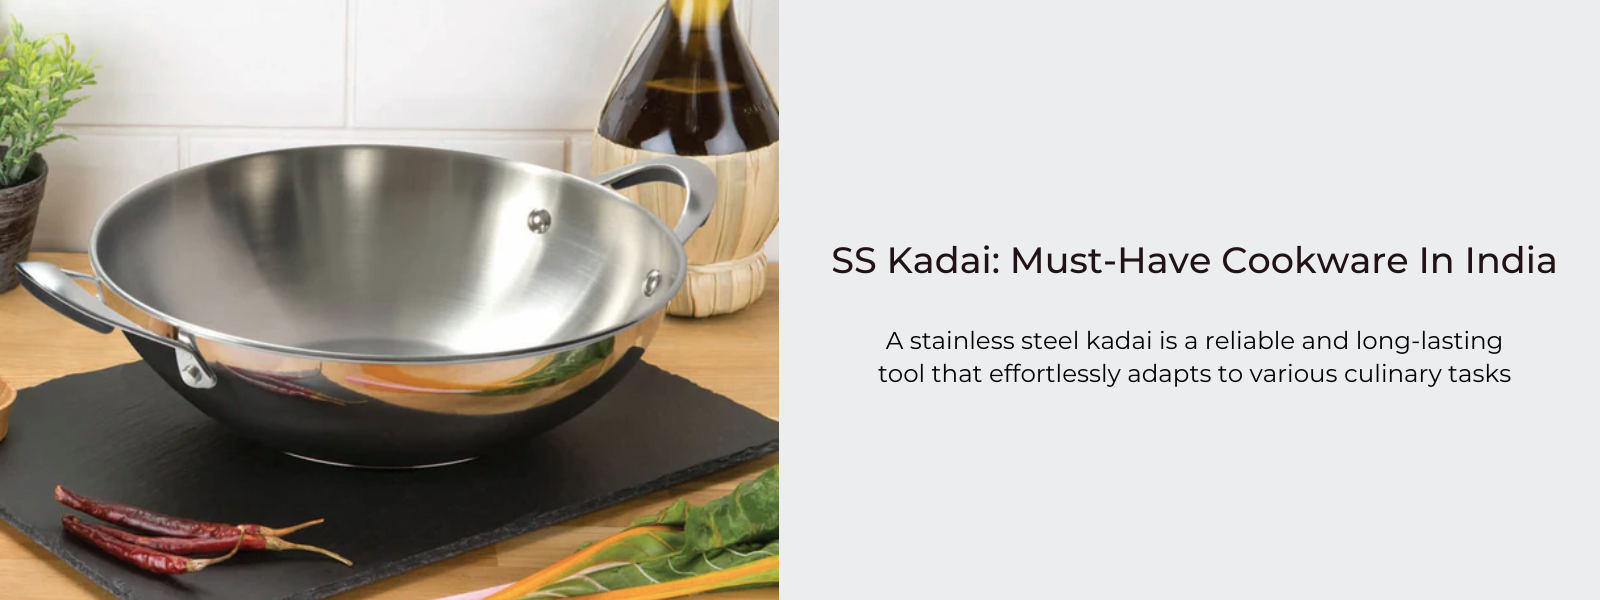 SS Kadai: Must-Have Cookware In India